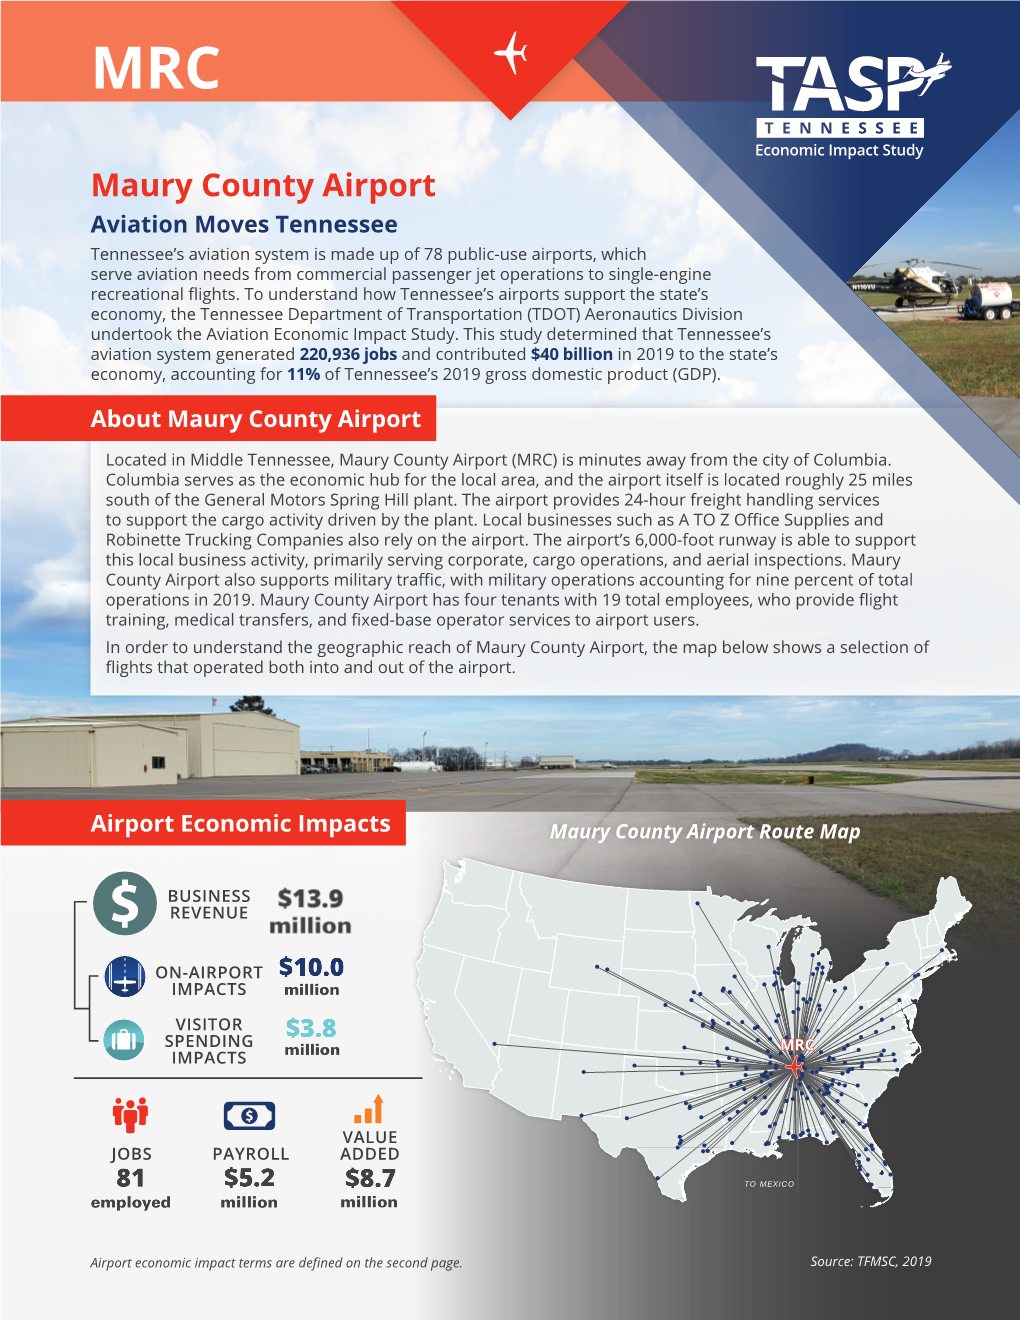 Maury County Airport